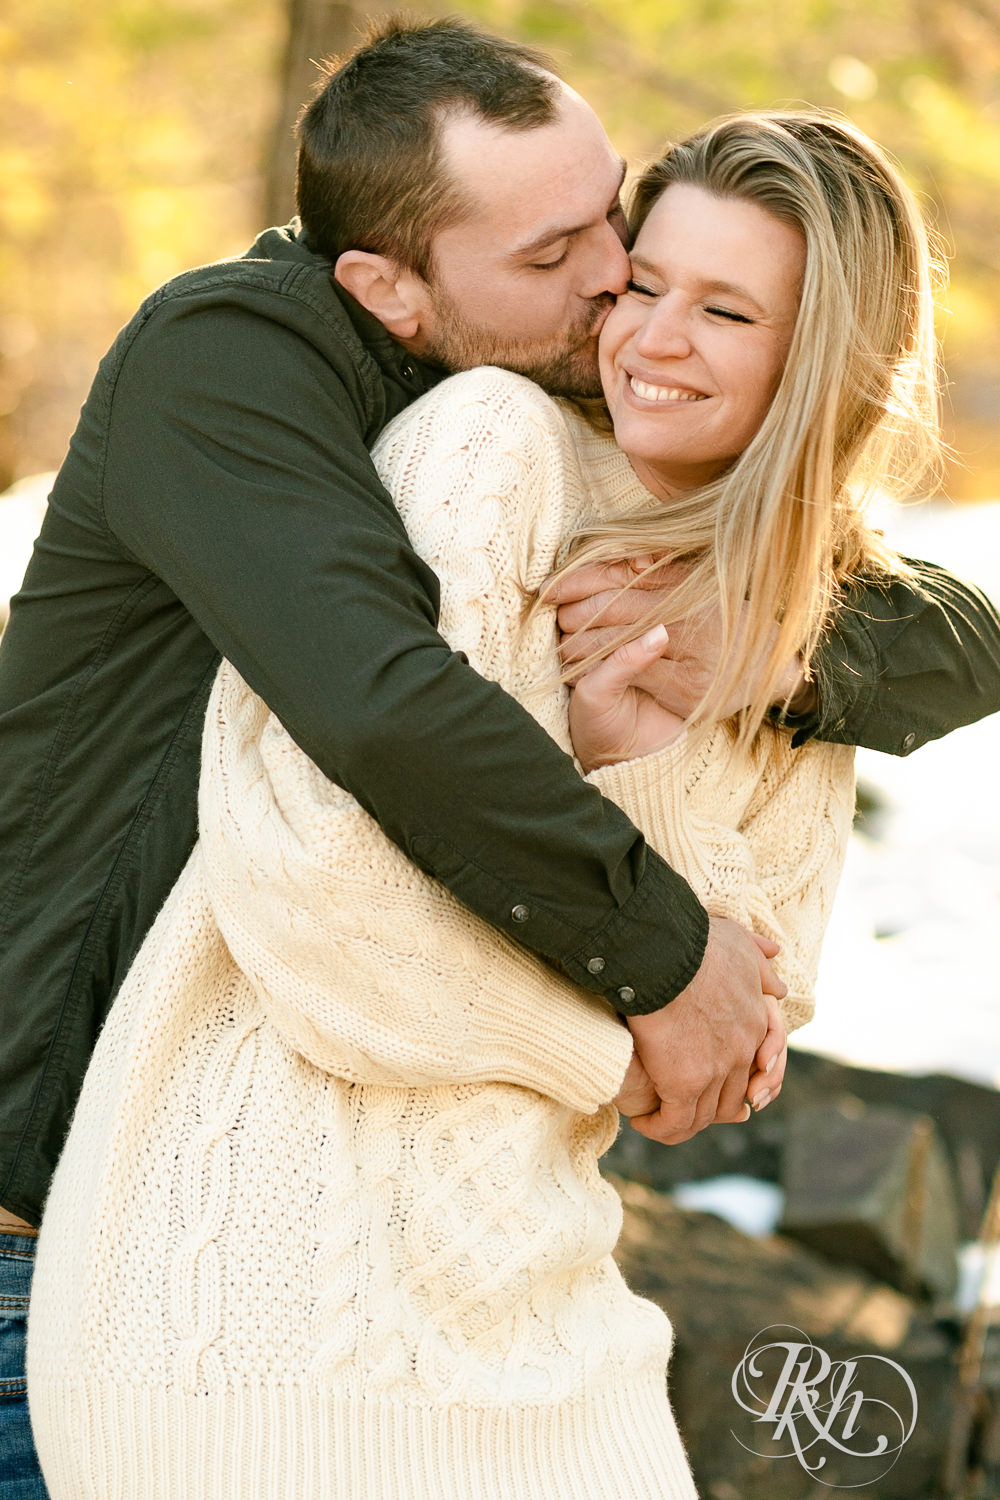 Man in jeans and green shirt and woman in a white sweater smile laugh at winter engagement photography session in Taylors Falls, Minnesota.